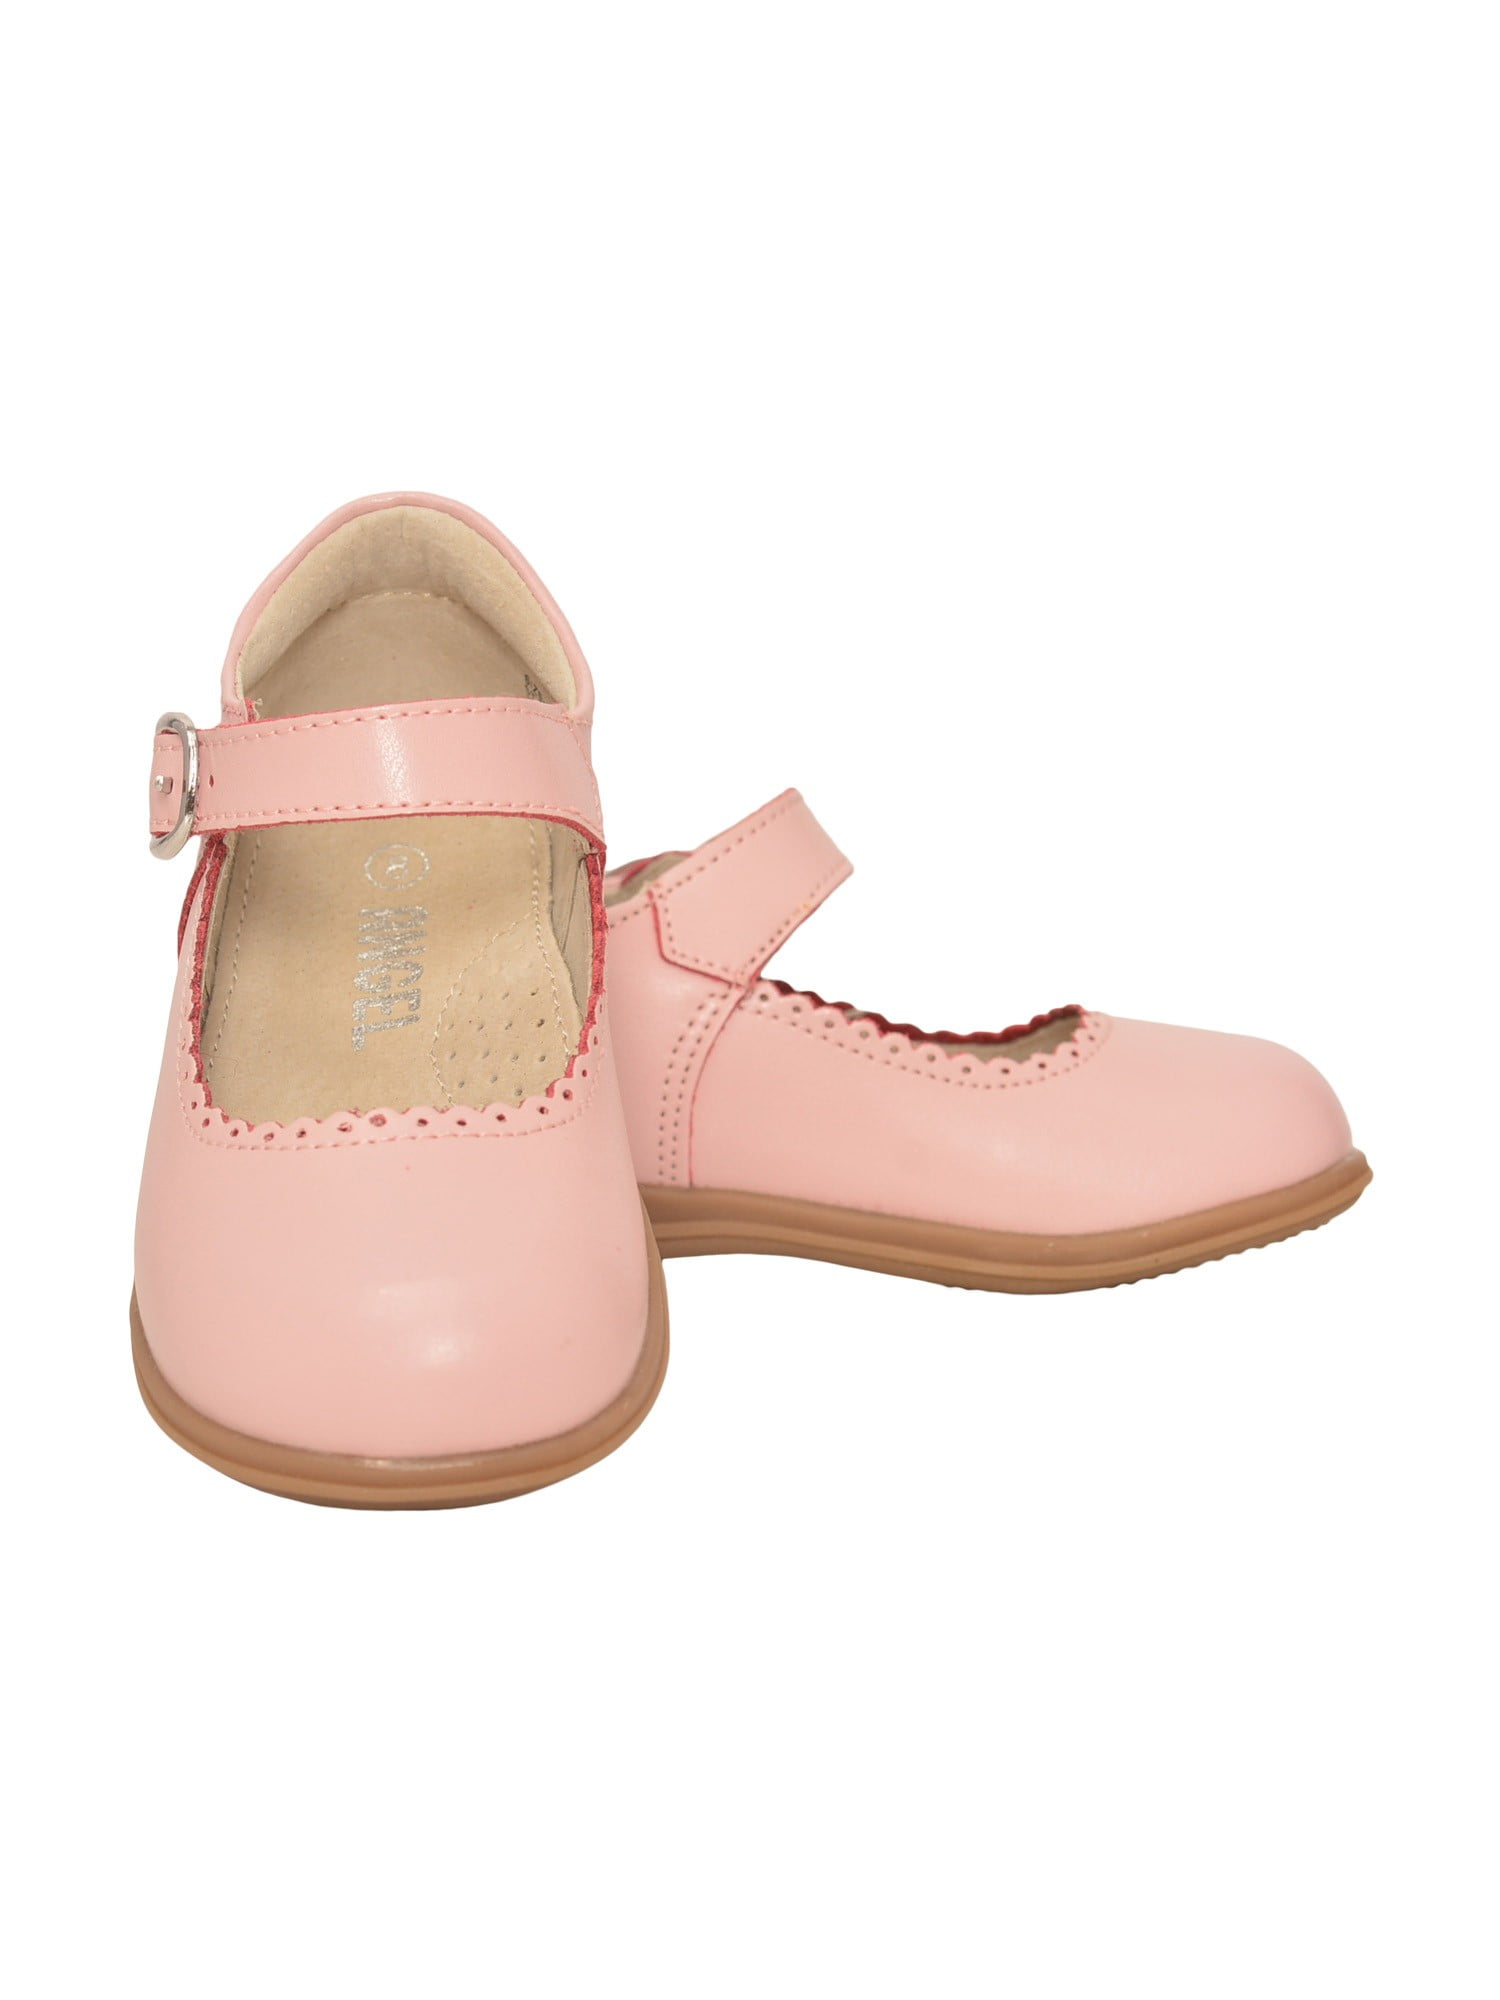 Angel Girls Pink Scalloped Trim Leather 